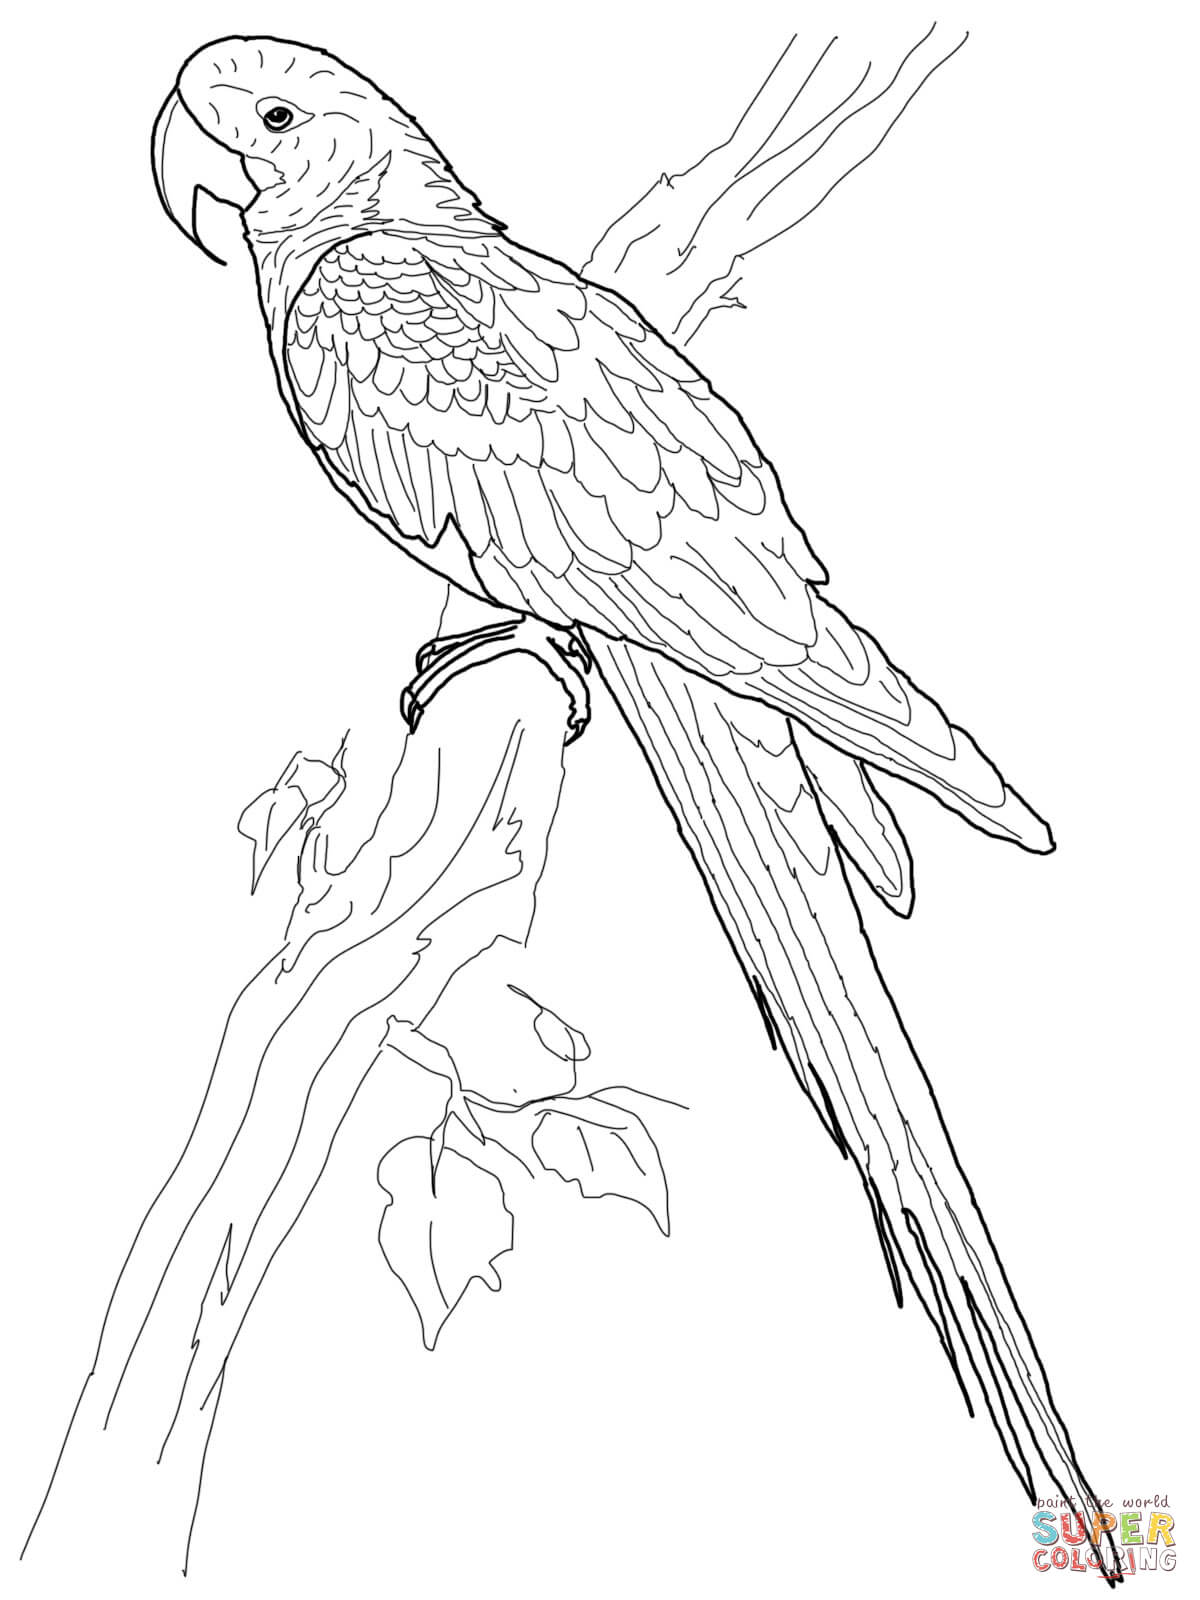 Hyacinth Macaw coloring page | Free Printable Coloring Pages